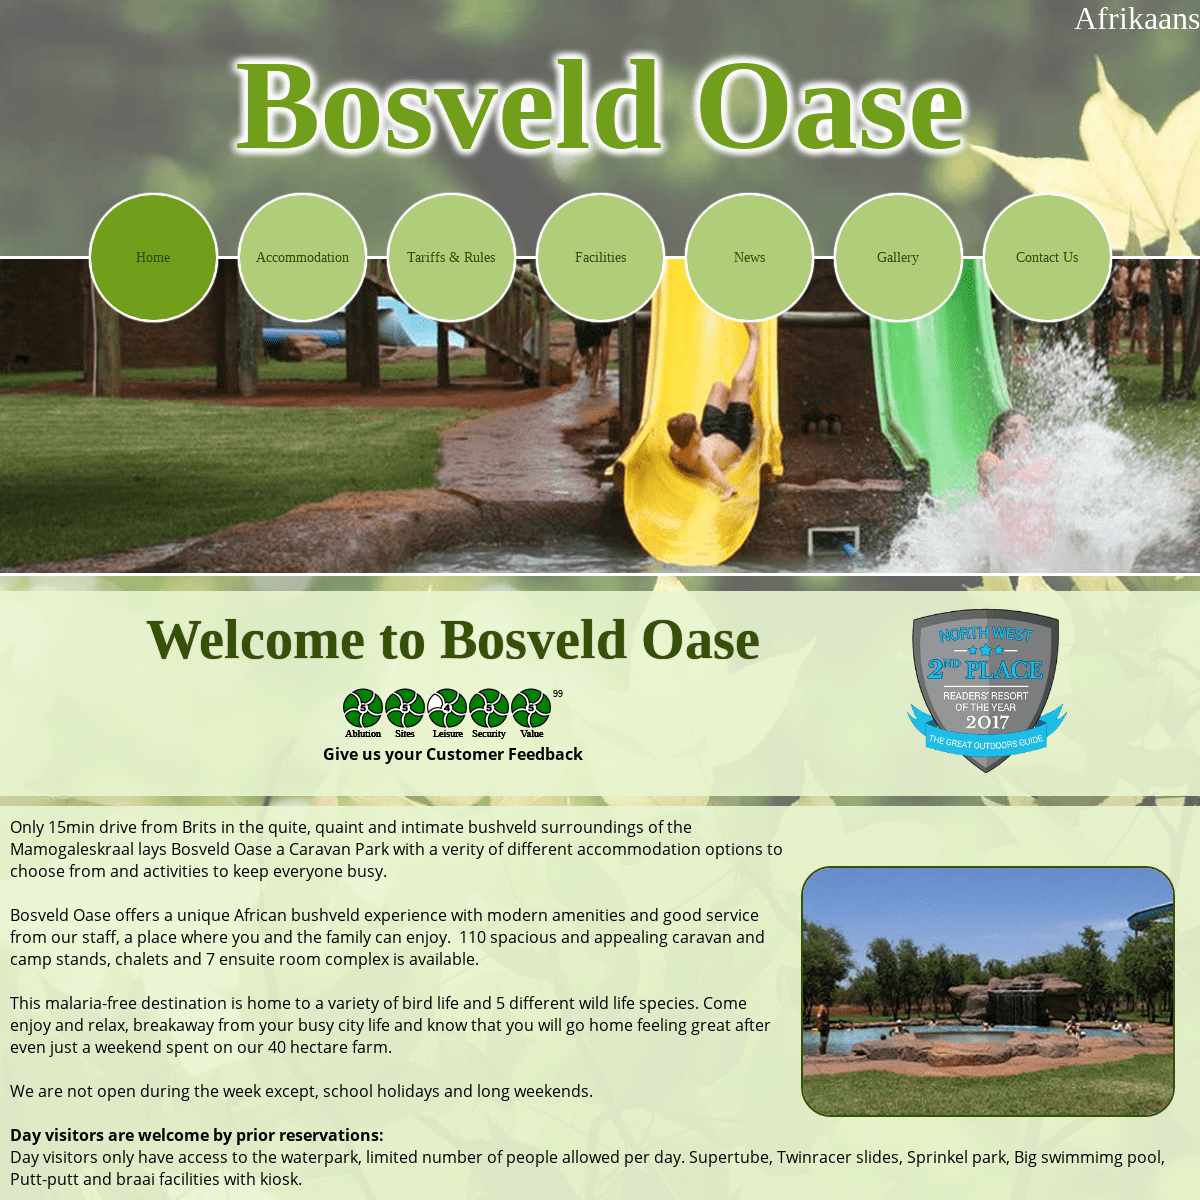 Bosveld Oase Brits - Mamogaleskraal, North West, Camping, Chalets, Room complex, Self-catering Accommodation